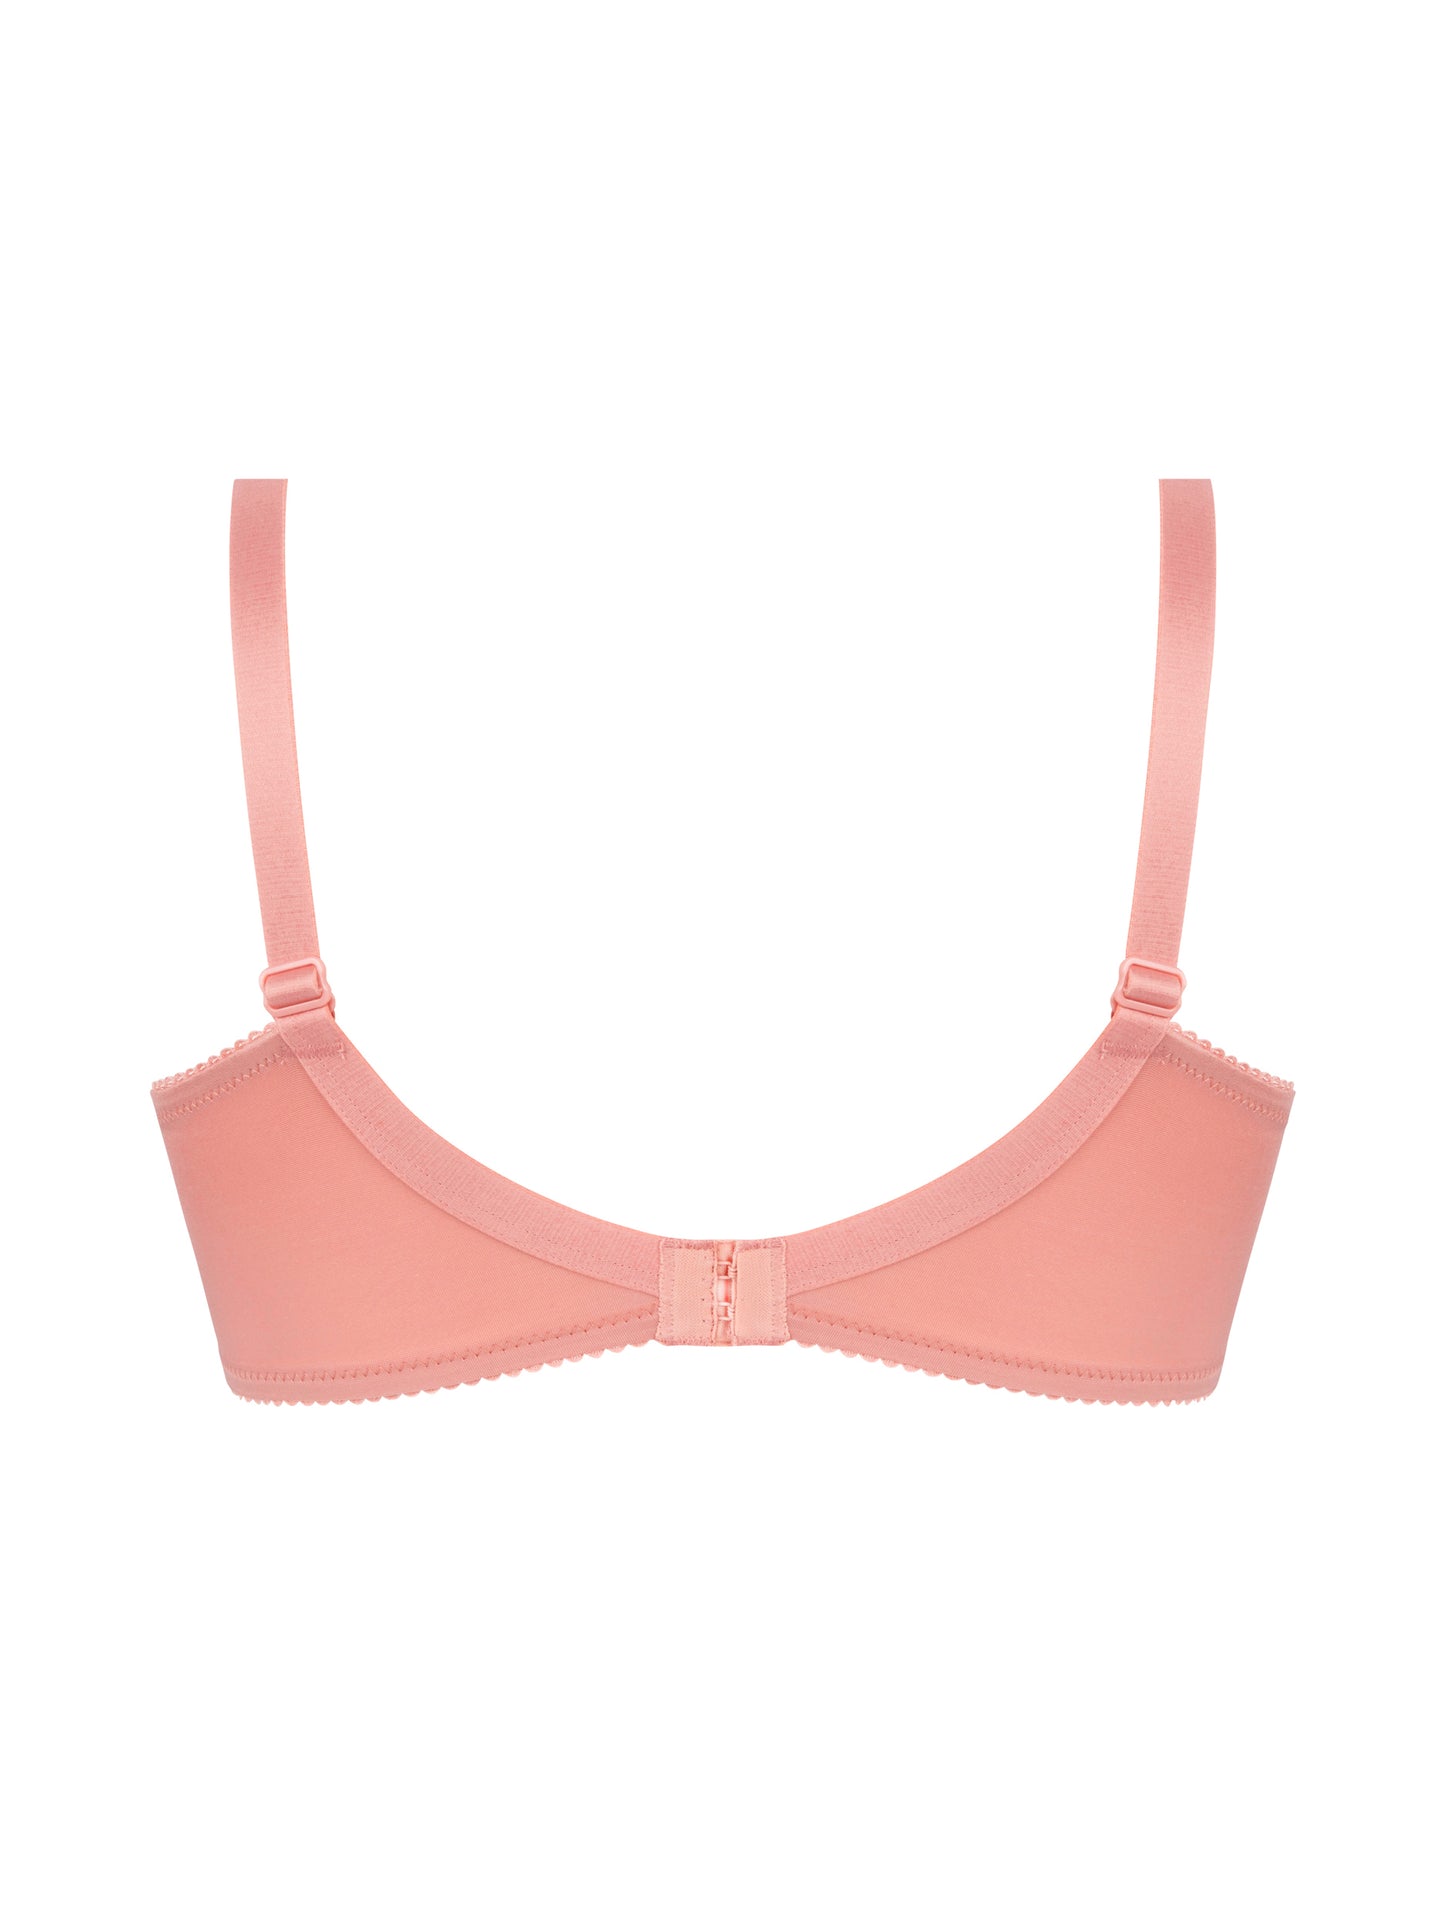 Splendeur Soie Pure Silk in Rose By Lise Charmel 3-Parts Full Cup Bra - sizes 36-44 D-F (US sizes)